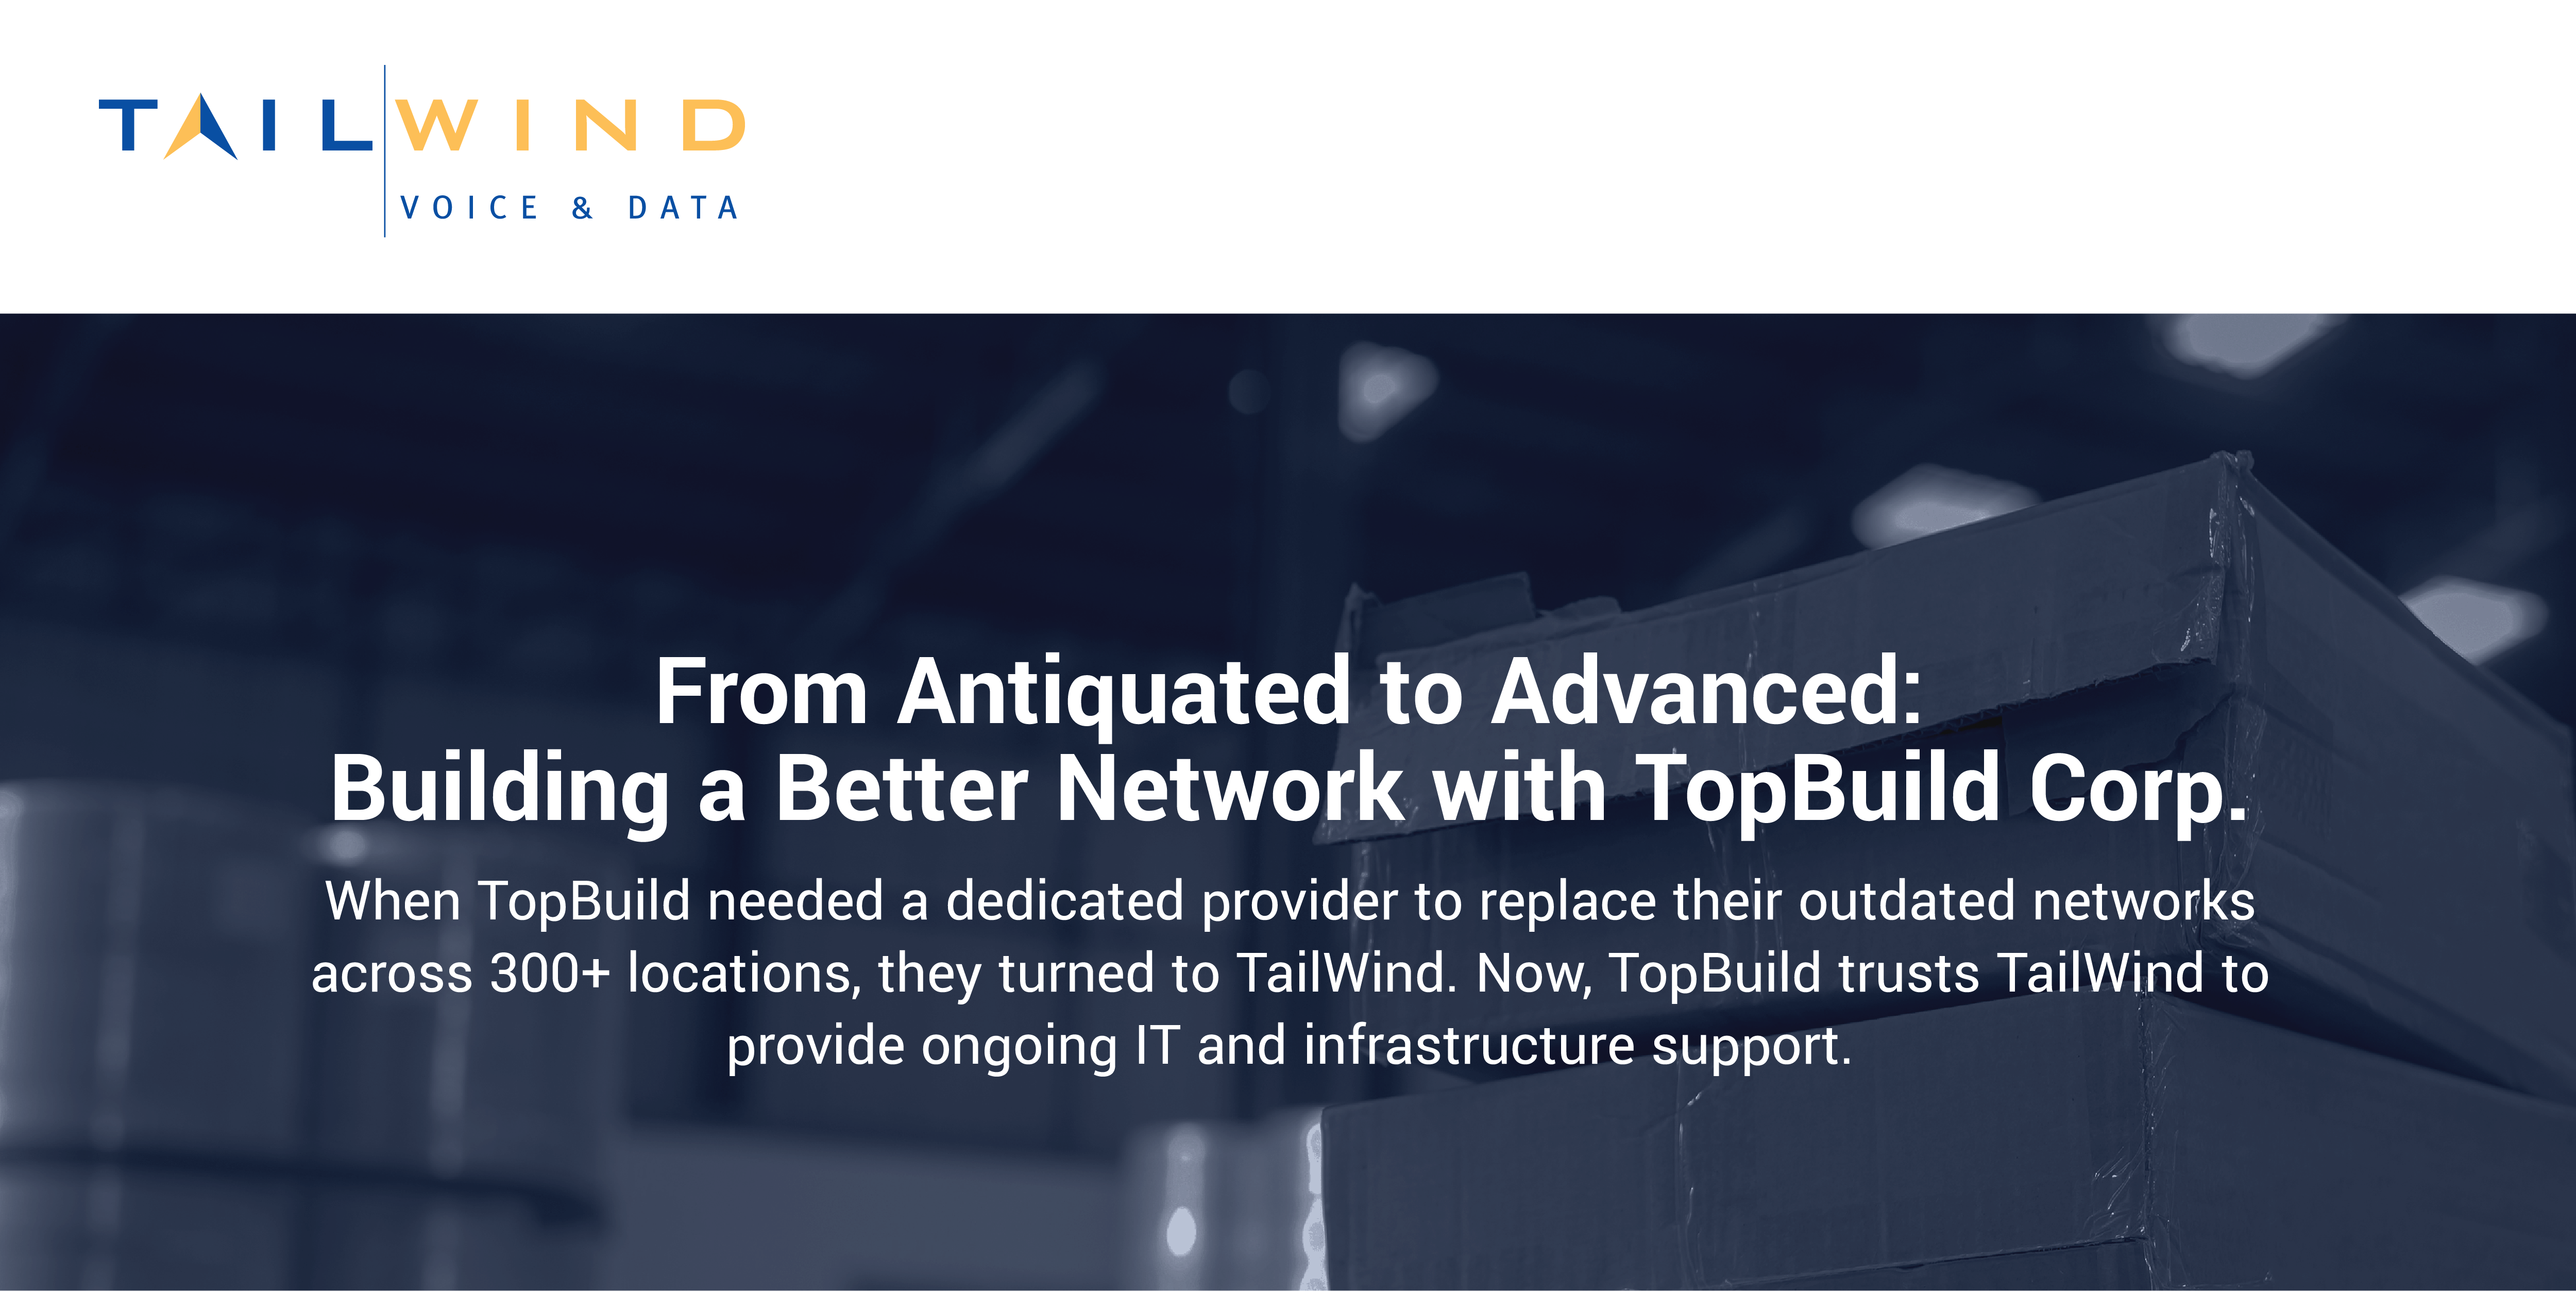 TopBuild Upgrades Connectivity & Supports 300+ Locations With TailWind